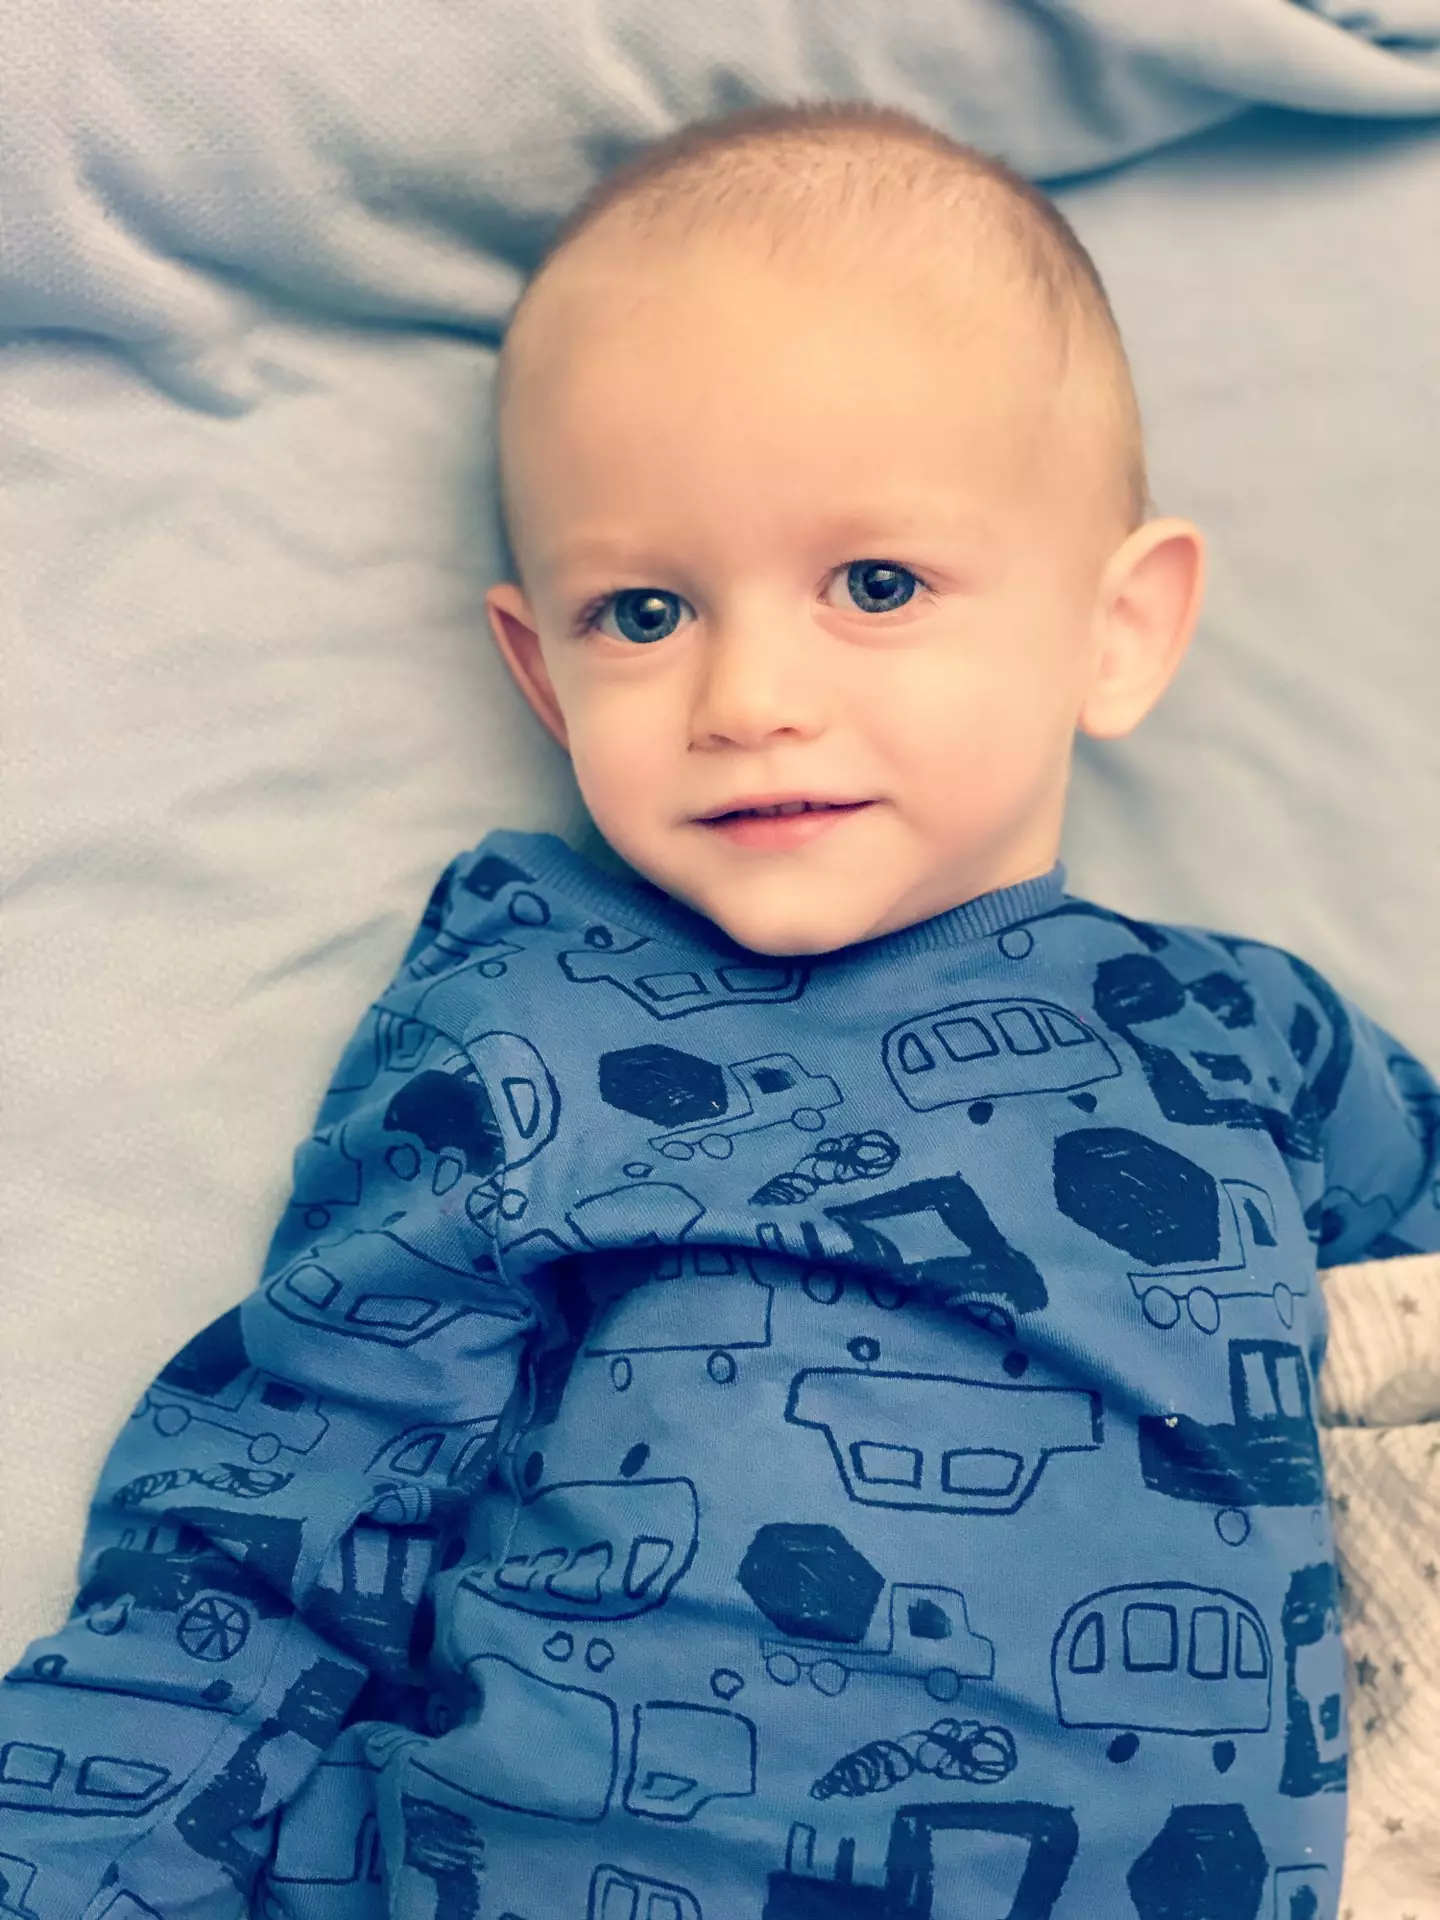 Little Jaxon was diagnosed with kidney cancer.